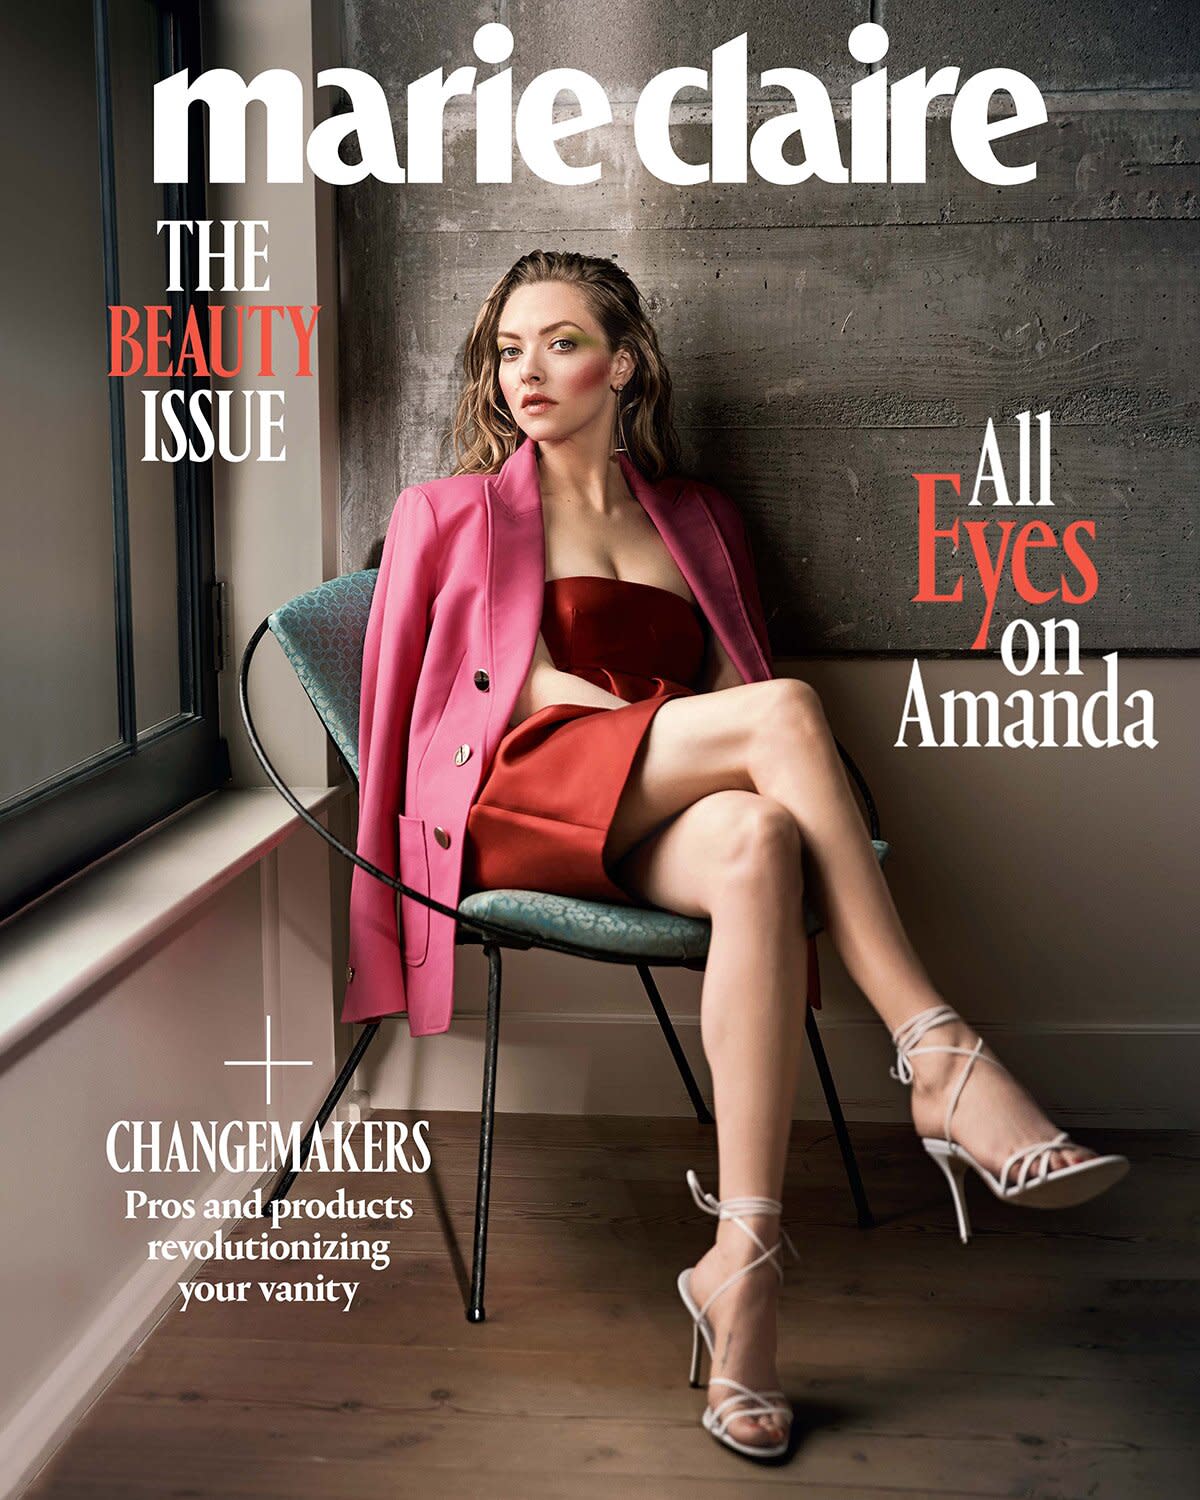 Amanda Seyfried Wants to Become a Doula: 'Childbirth is Amazing